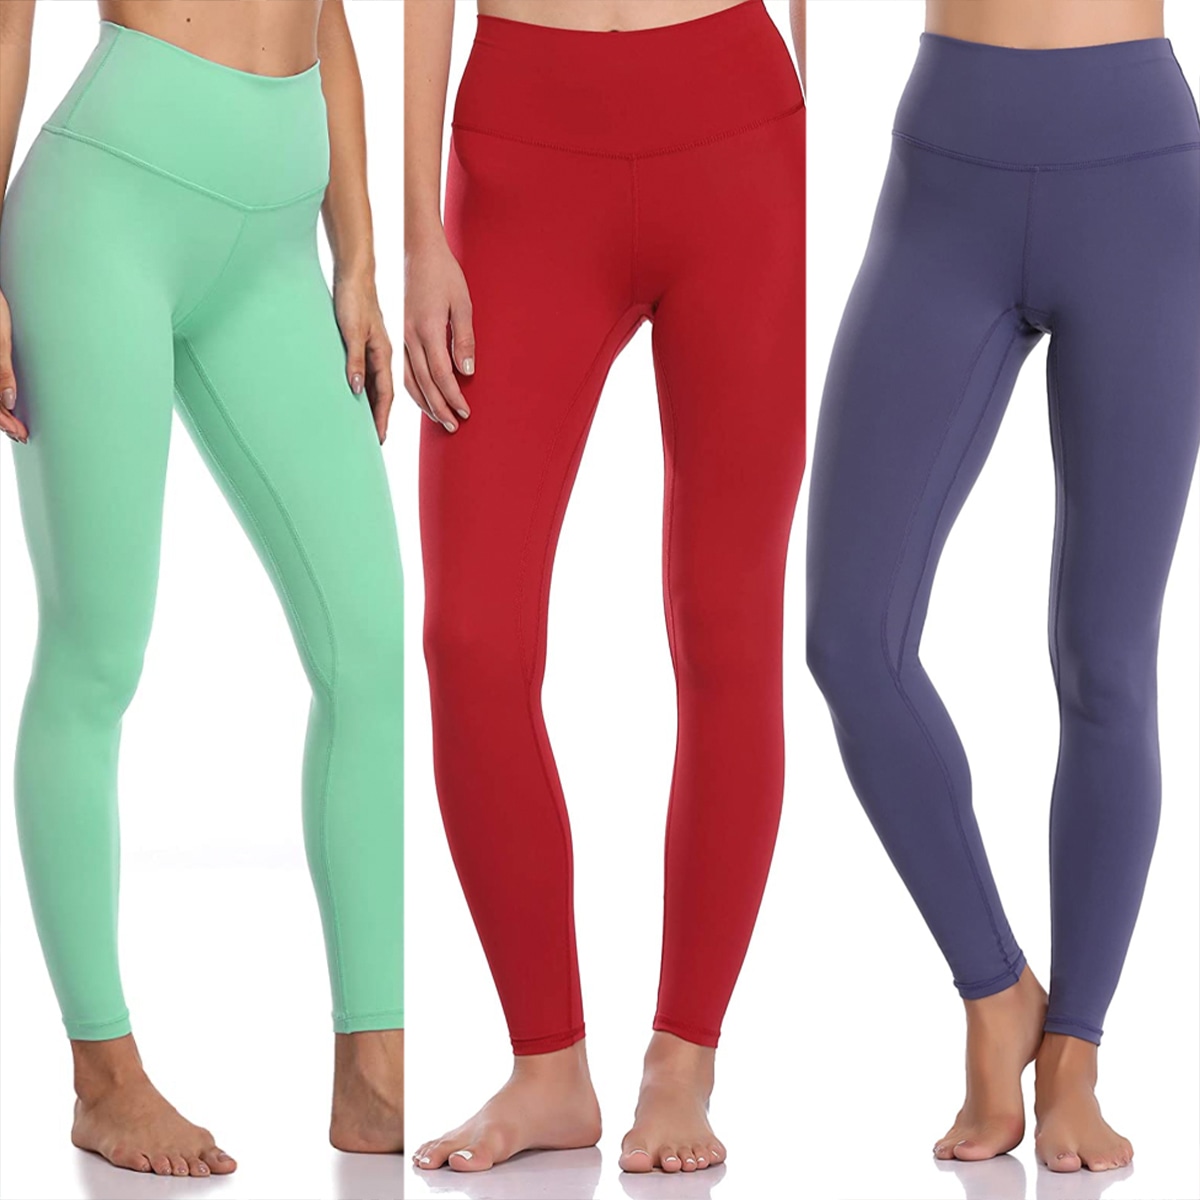 These $23 Leggings Have Over 28K 5-Star  Reviews